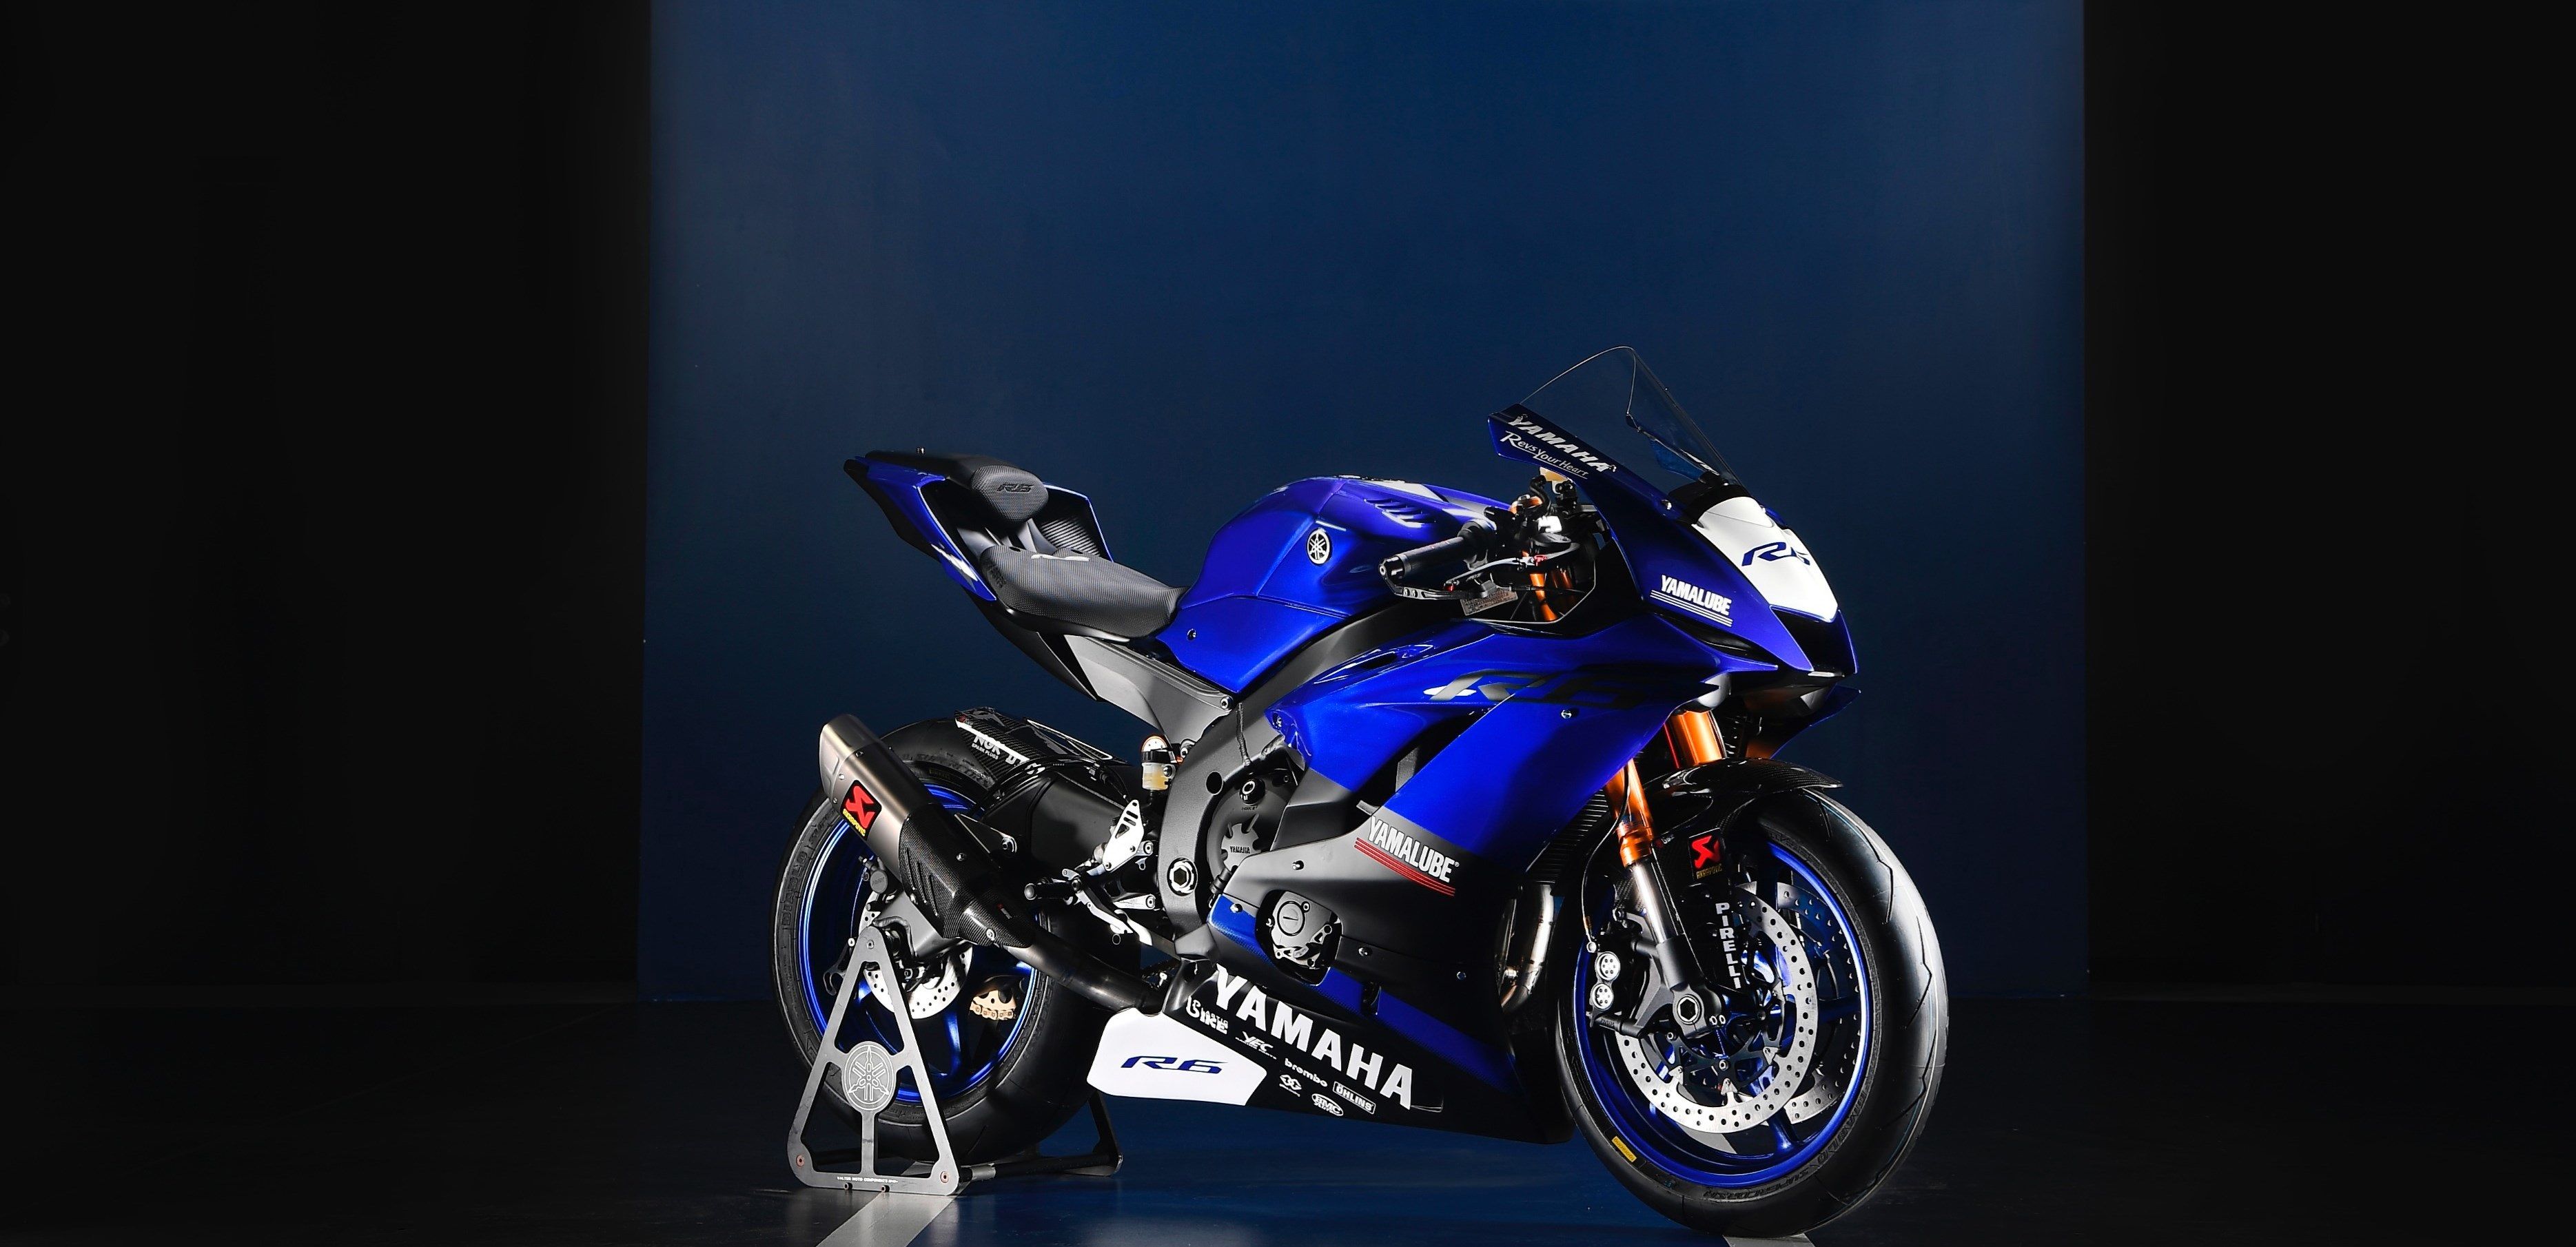 Yamaha R6 to Continue Racing in Supersport Next Generation